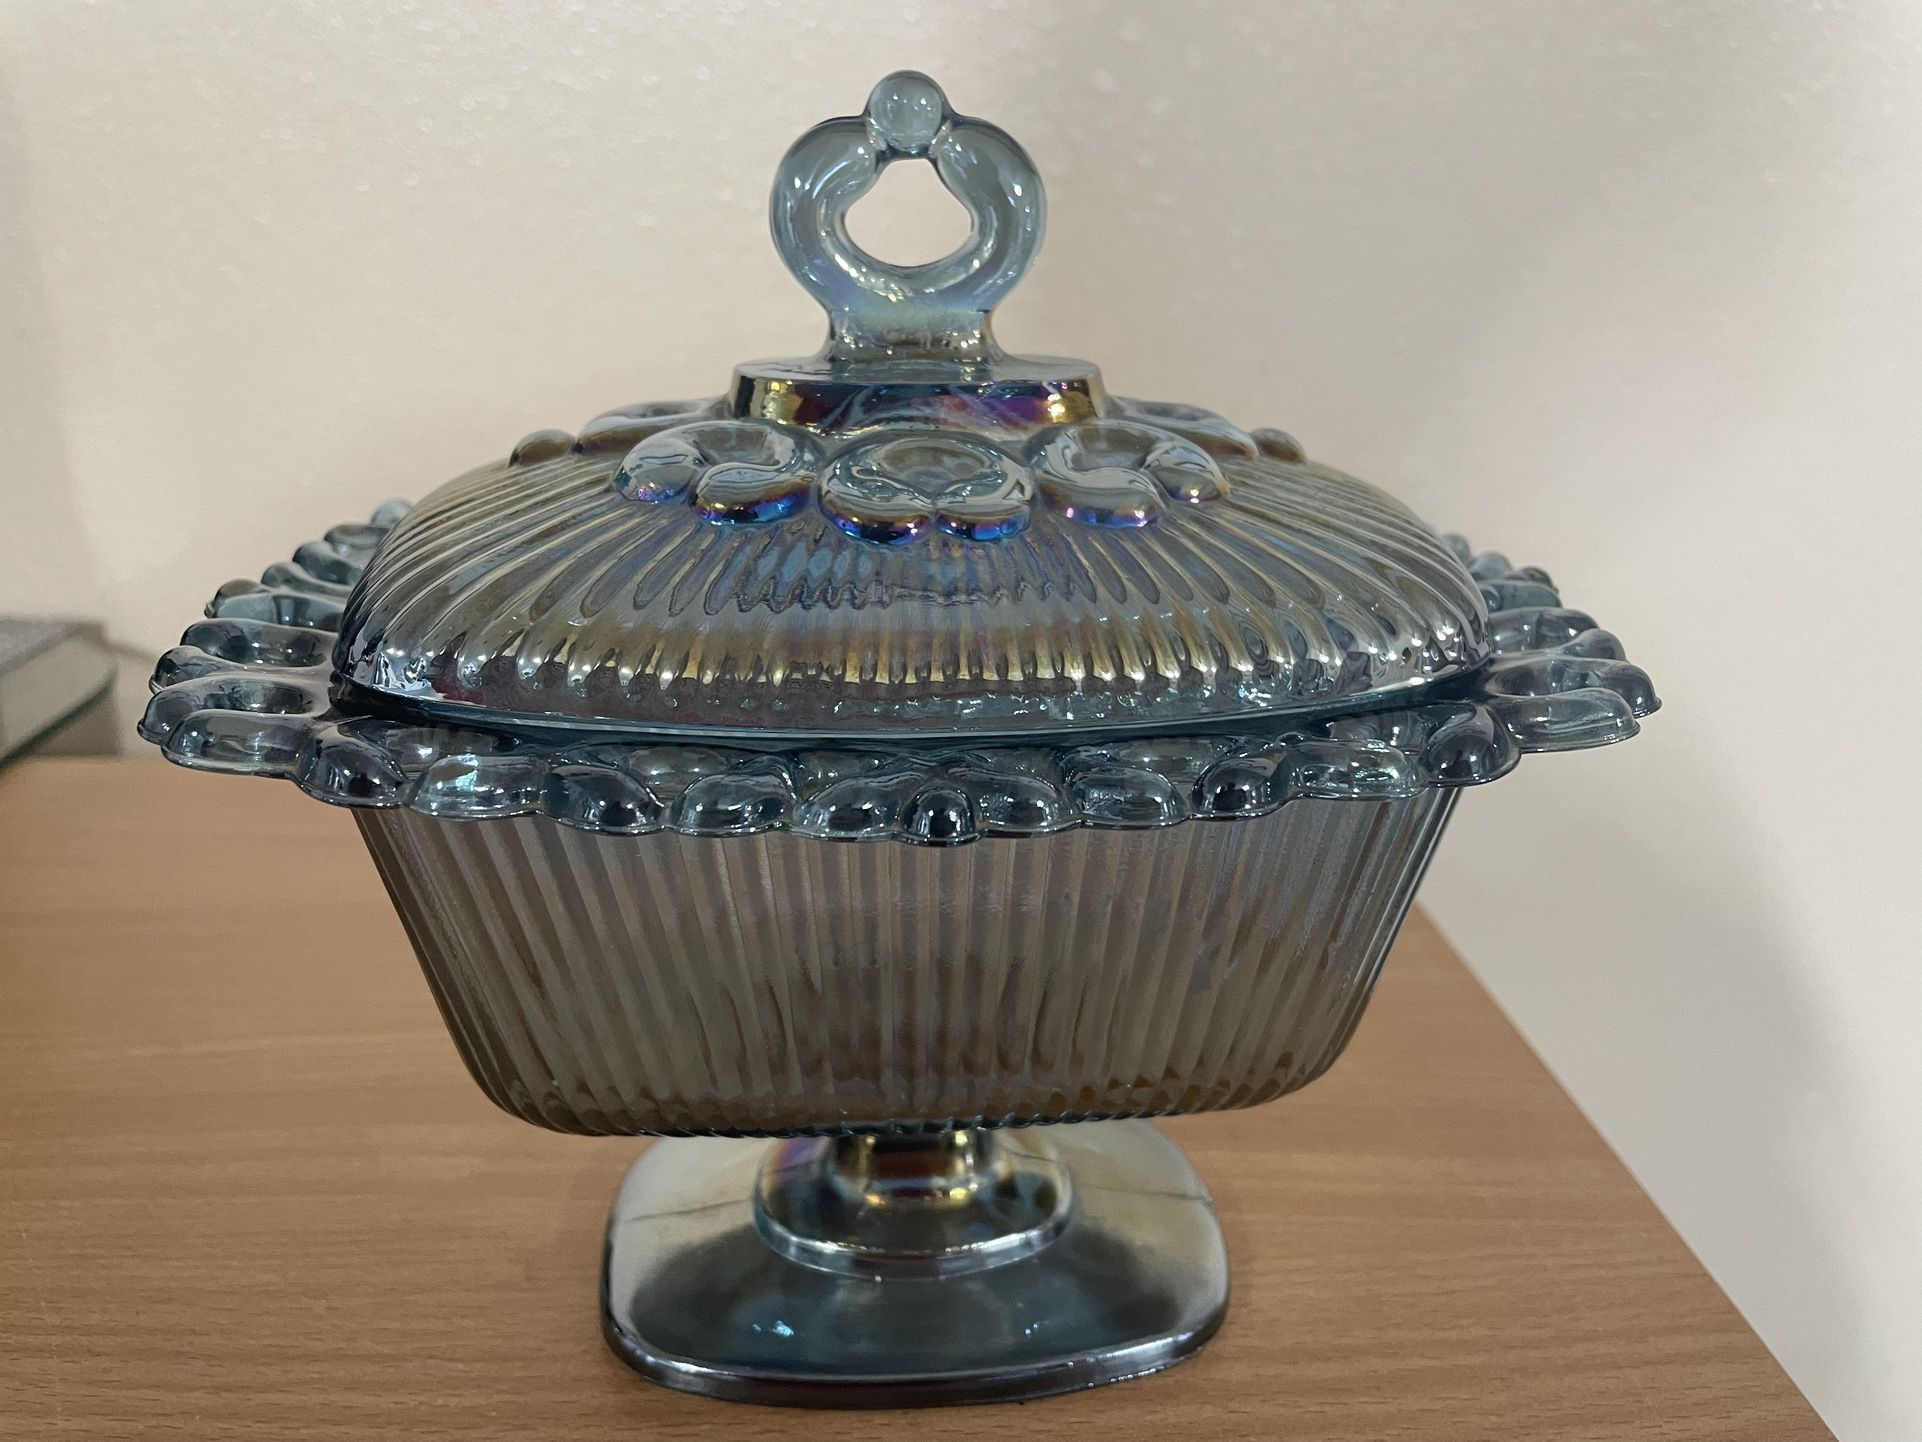 Vintage Candy Dish  w/ Lid